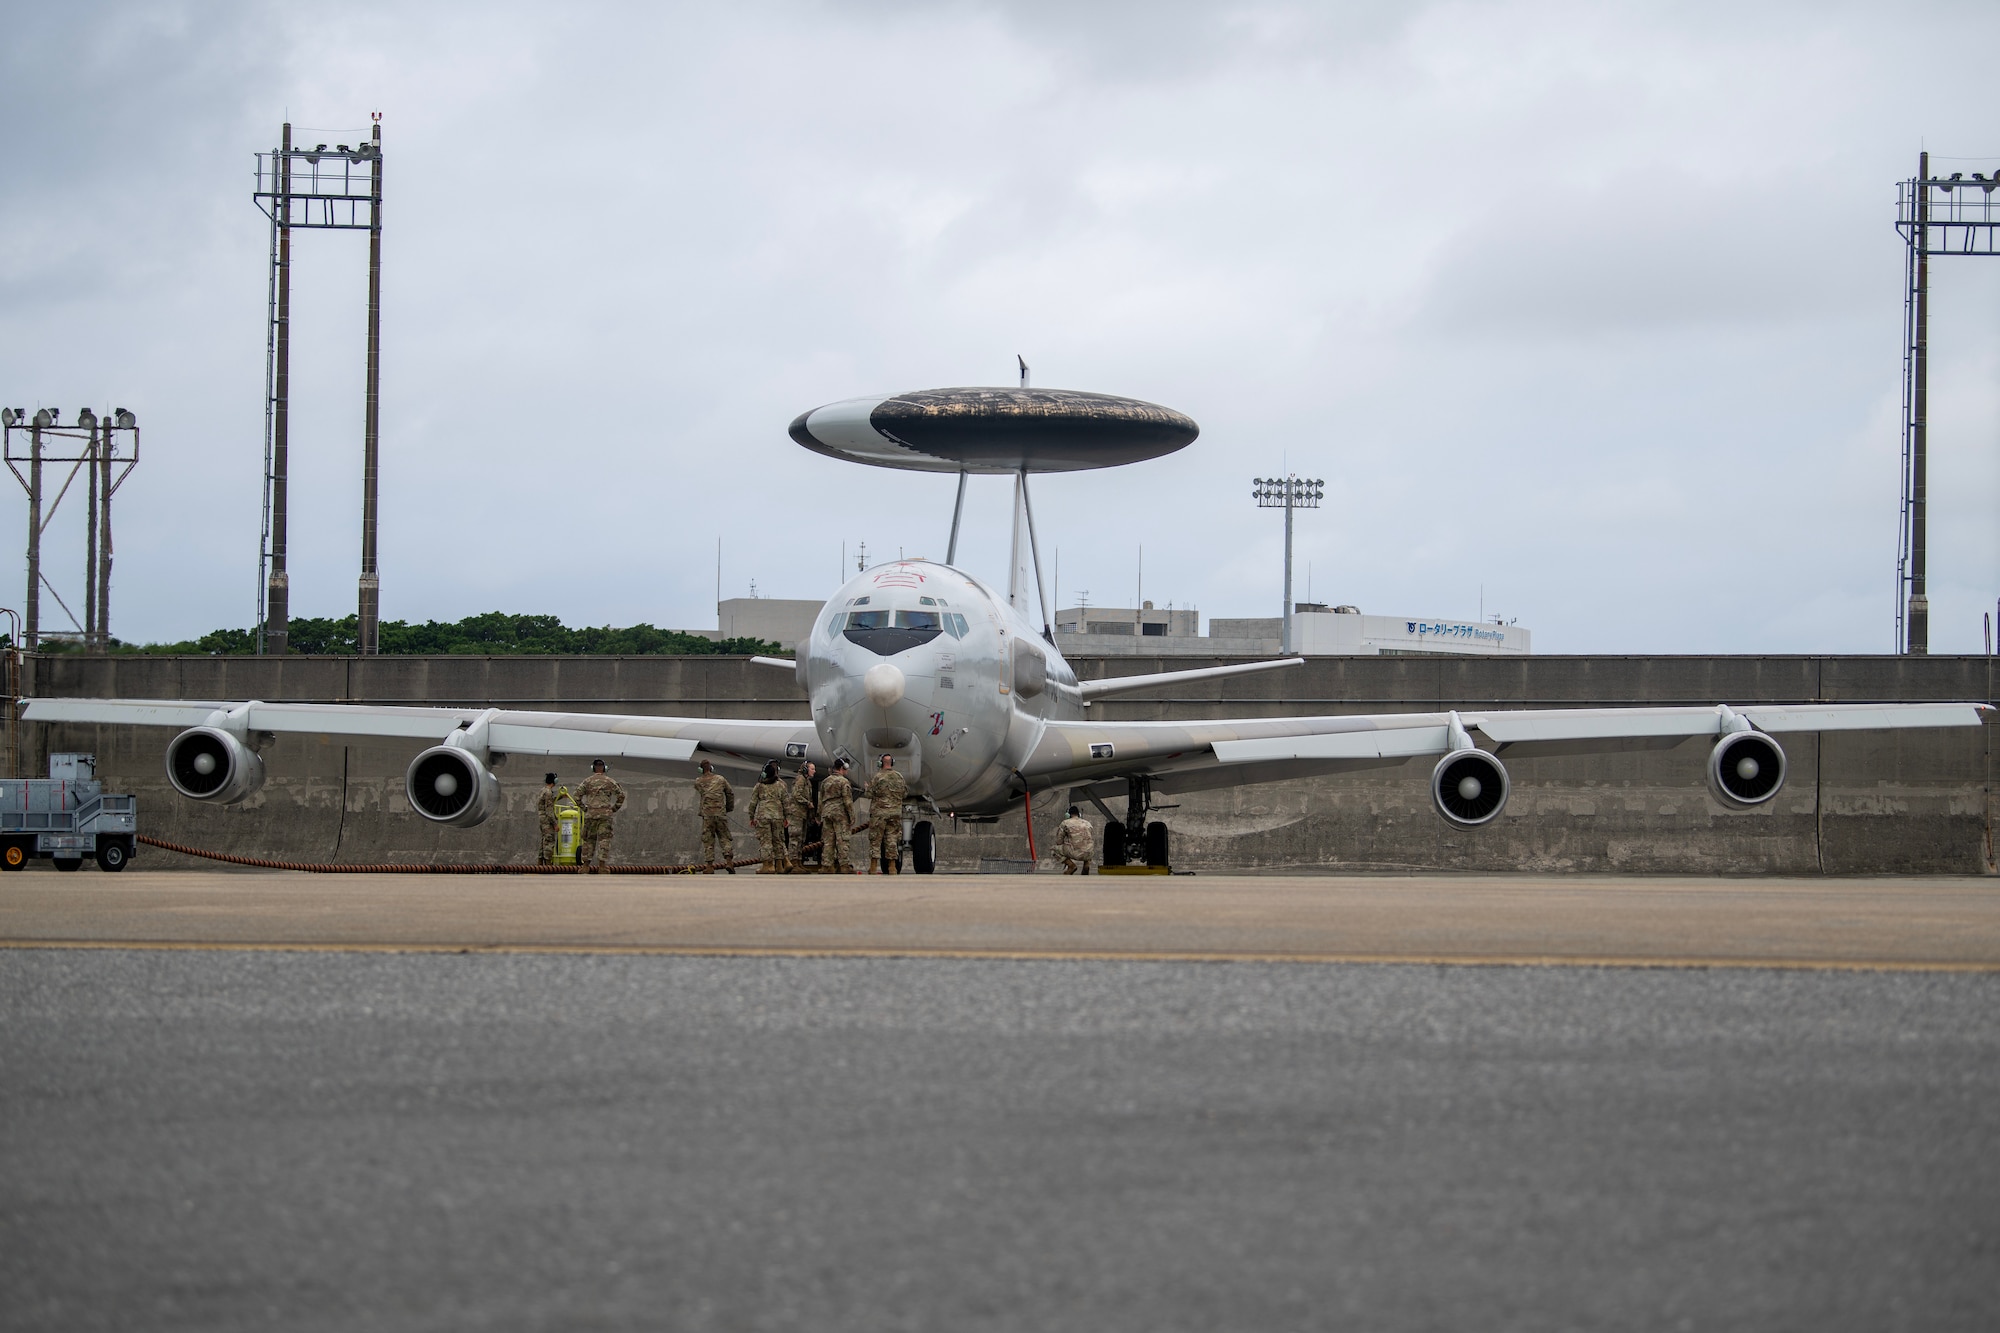 Maintainers preparing an AWACS for take-off